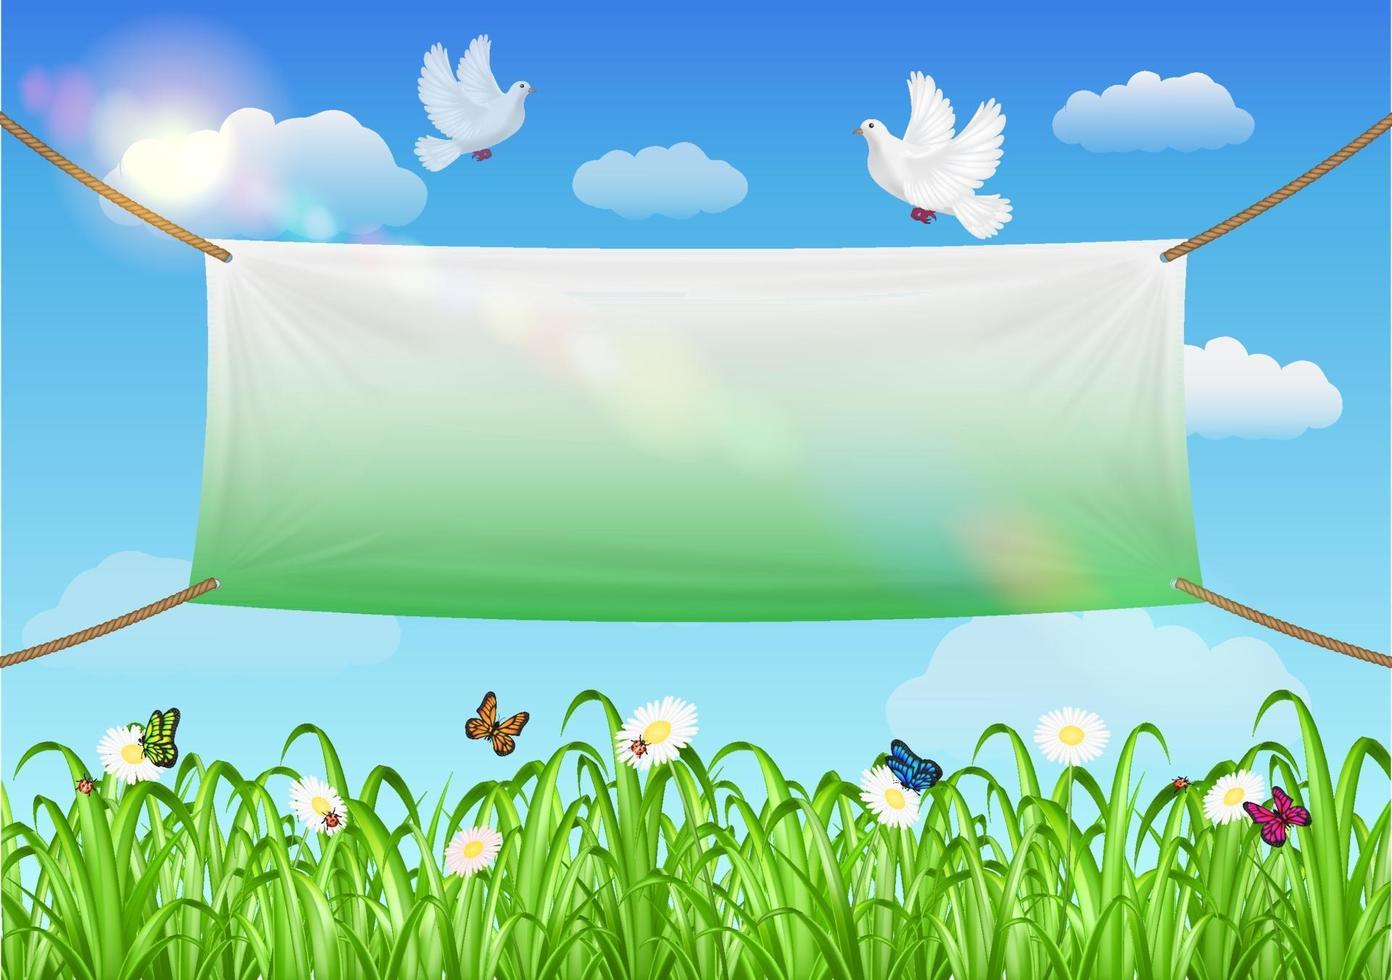 vinyl banners backdrop with grass and sky background vector